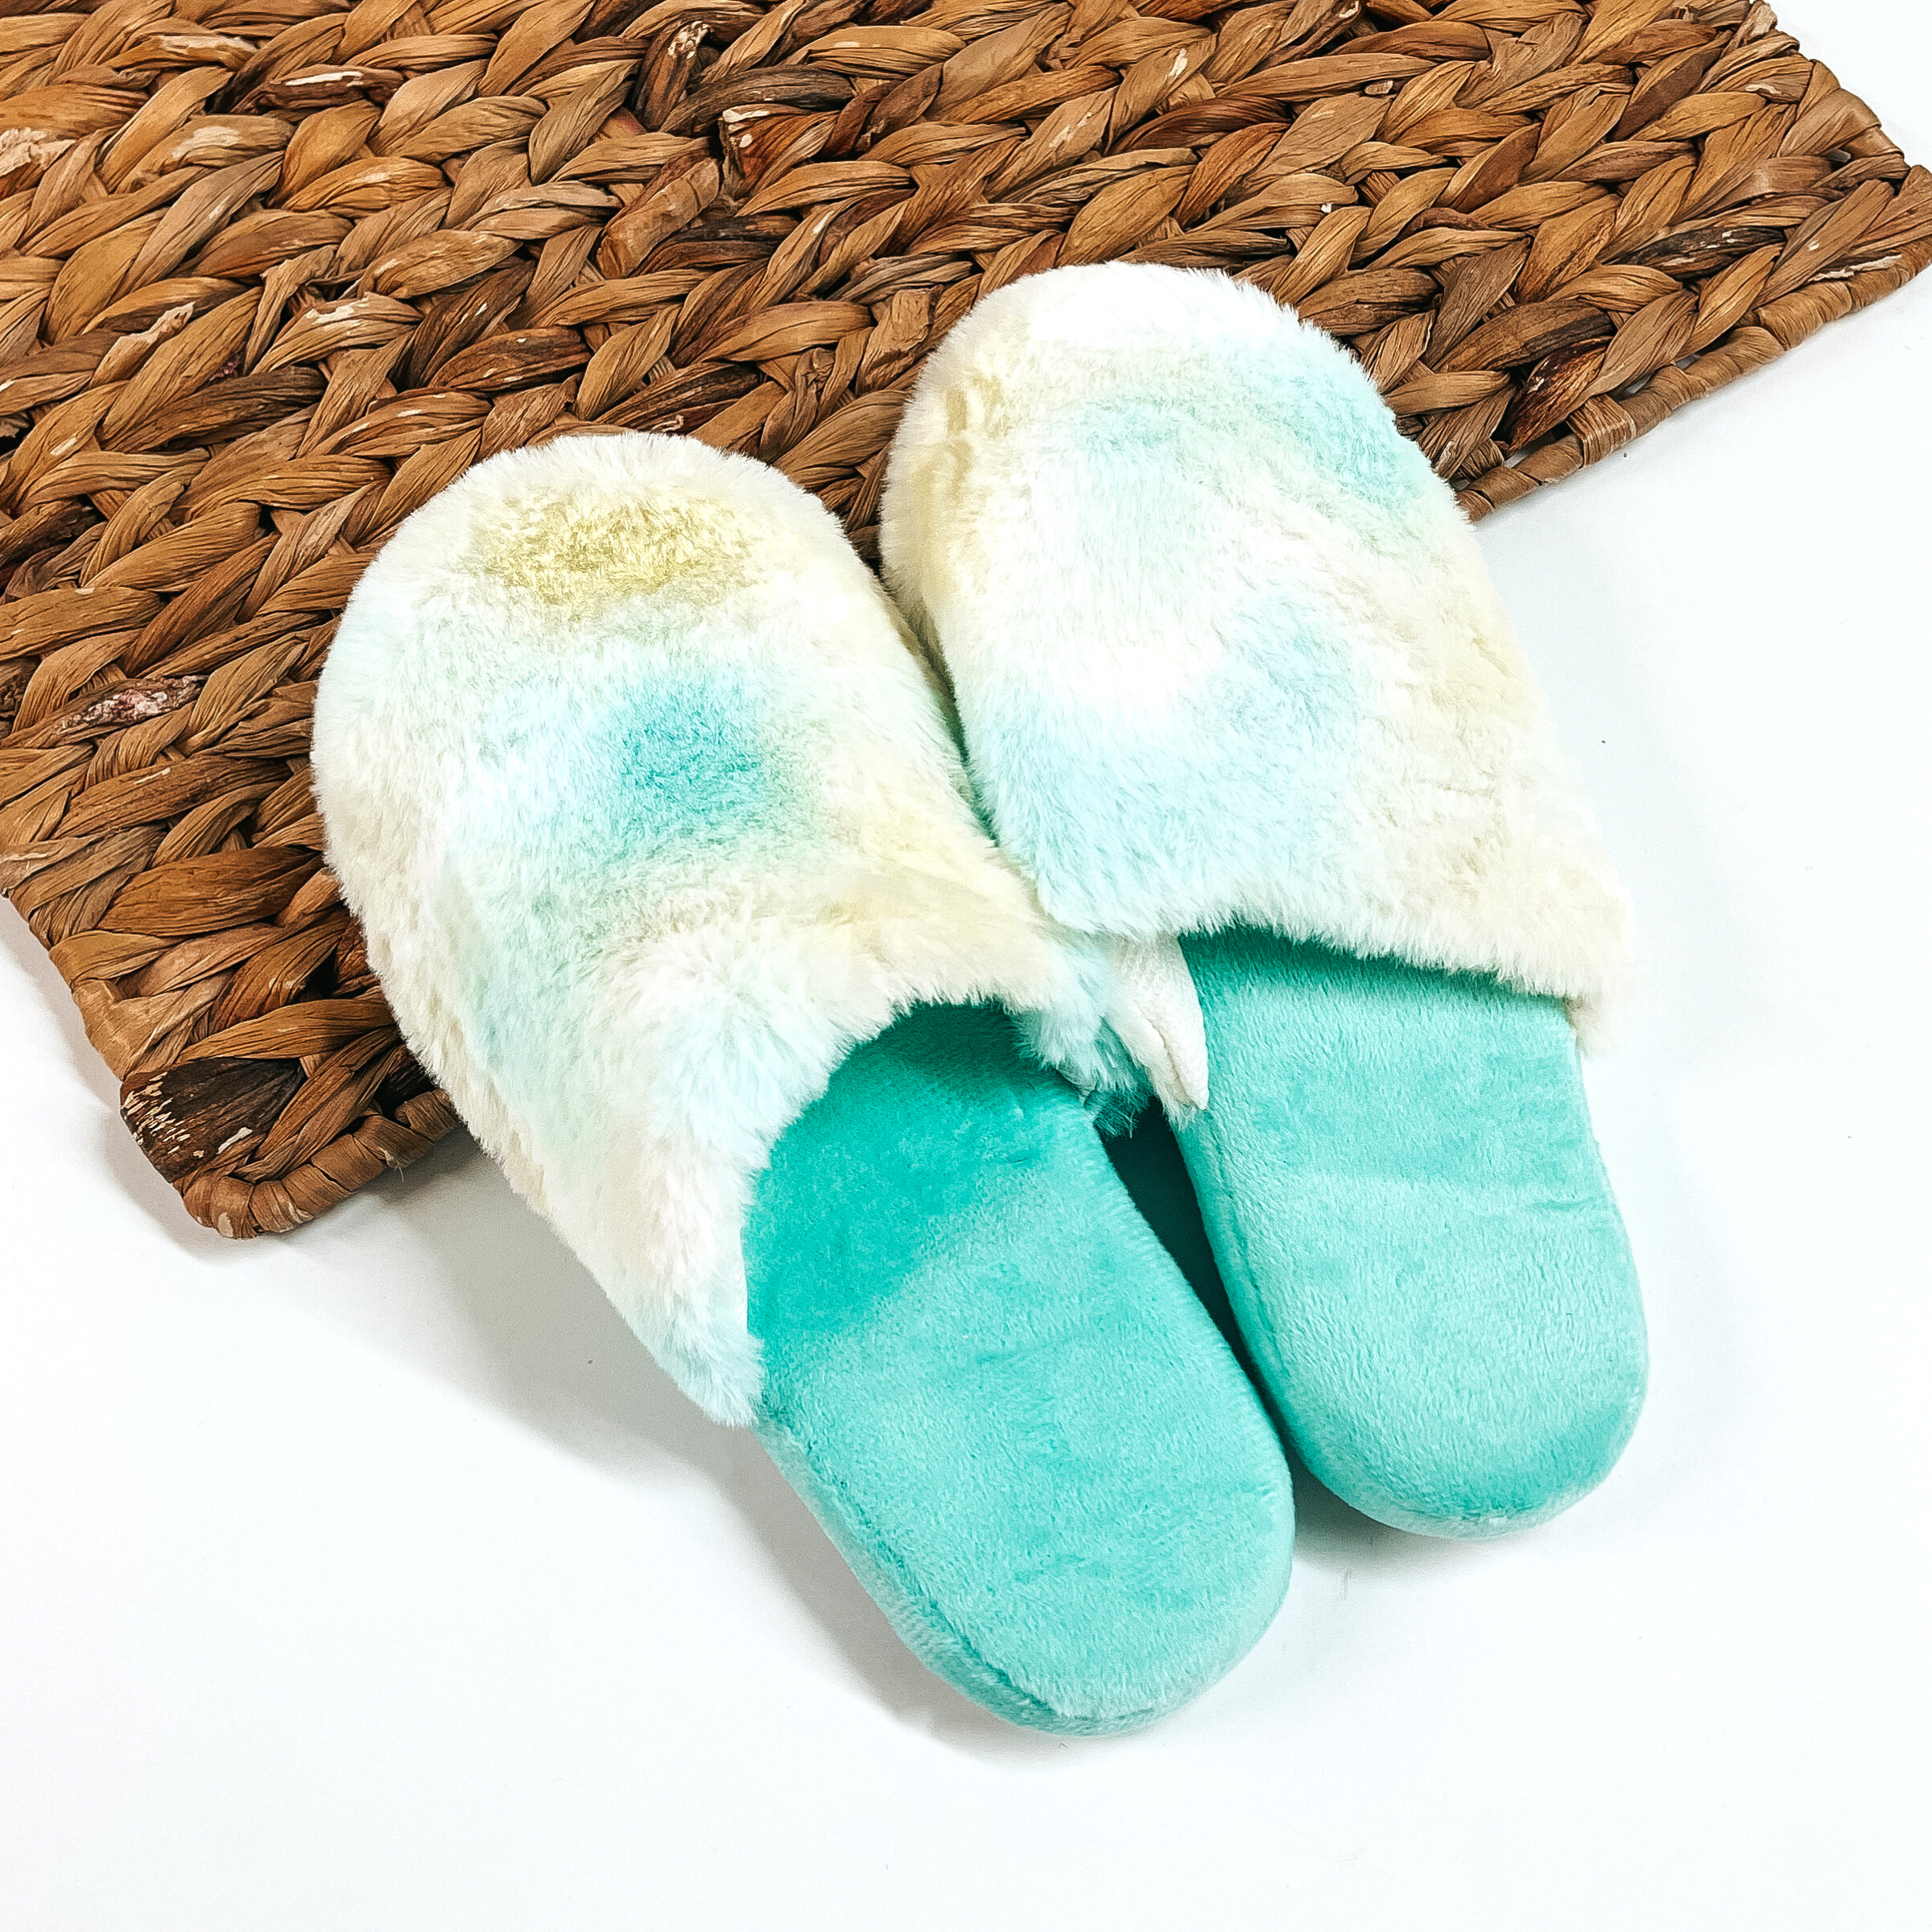 There are a pair of fluffy slip on slippers, the sole is teal and the top  part is tie dye with a teal/yellow/green mix. These slippers are placed on a  white background and a brown woven slate.